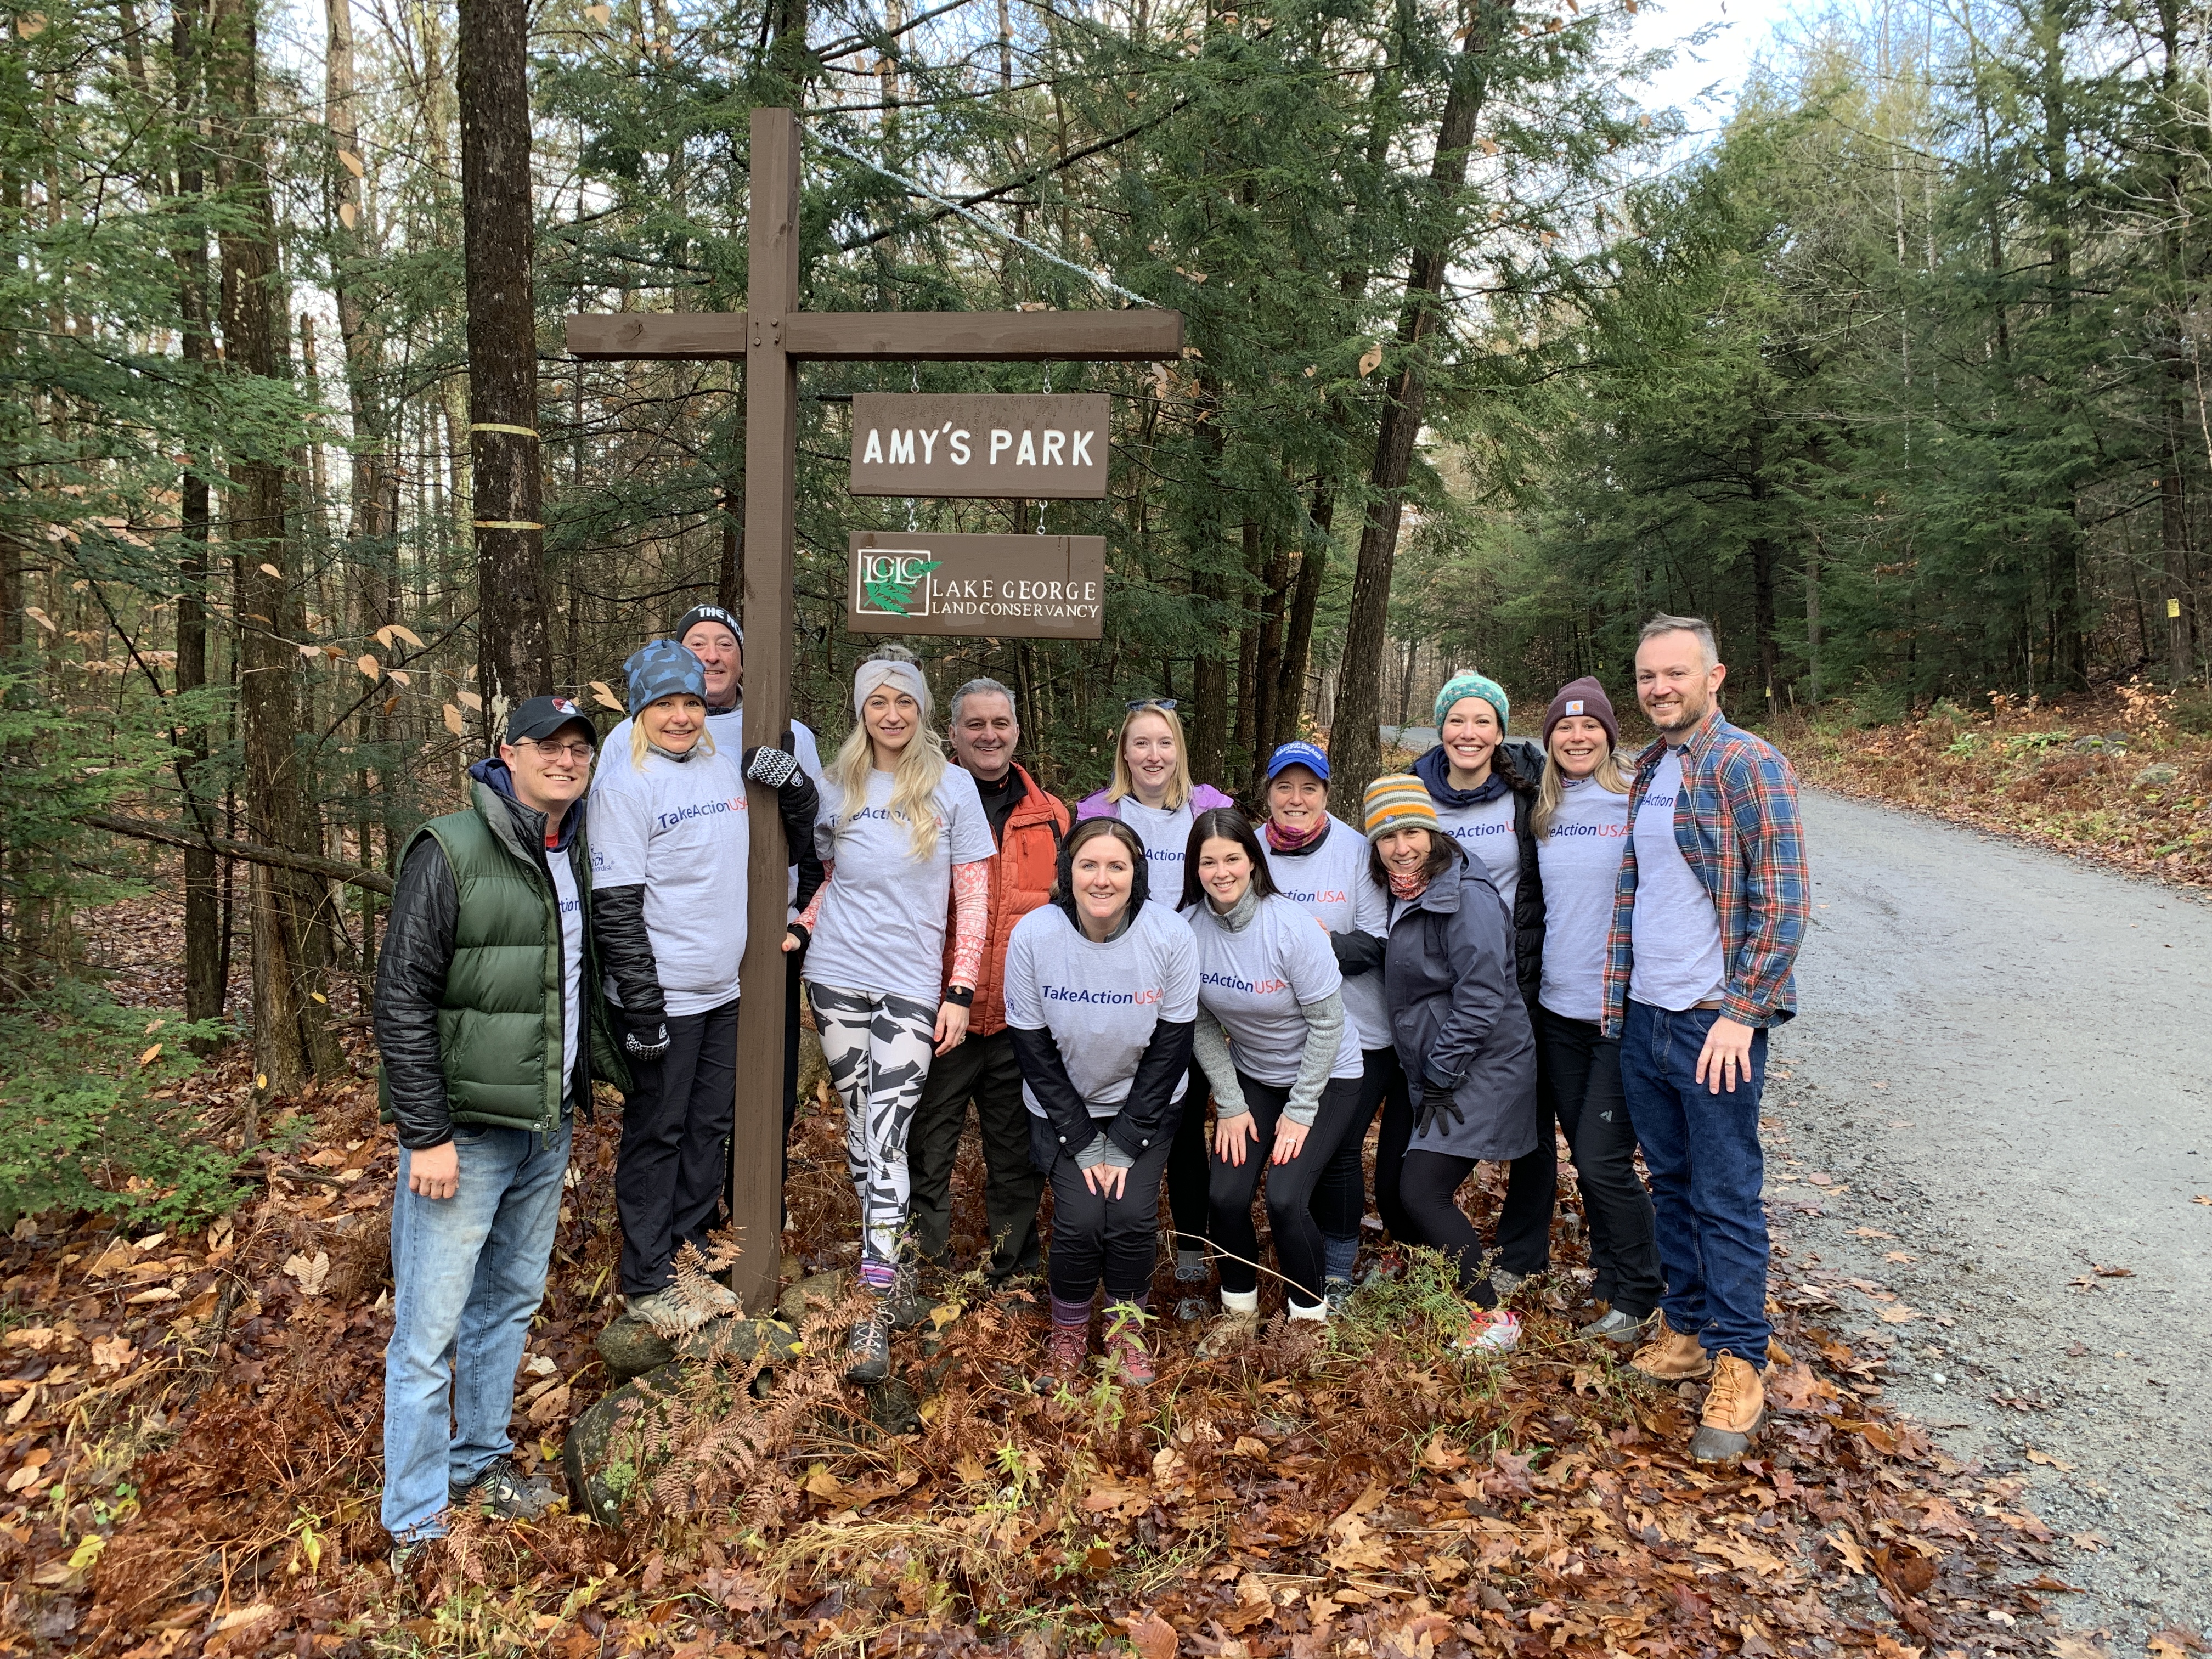 Group of 12 men and women stand in front of the Amy's Park sign. They are employees of Novo Nordisk, and volunteered for the day at Amy's Park on November 15.